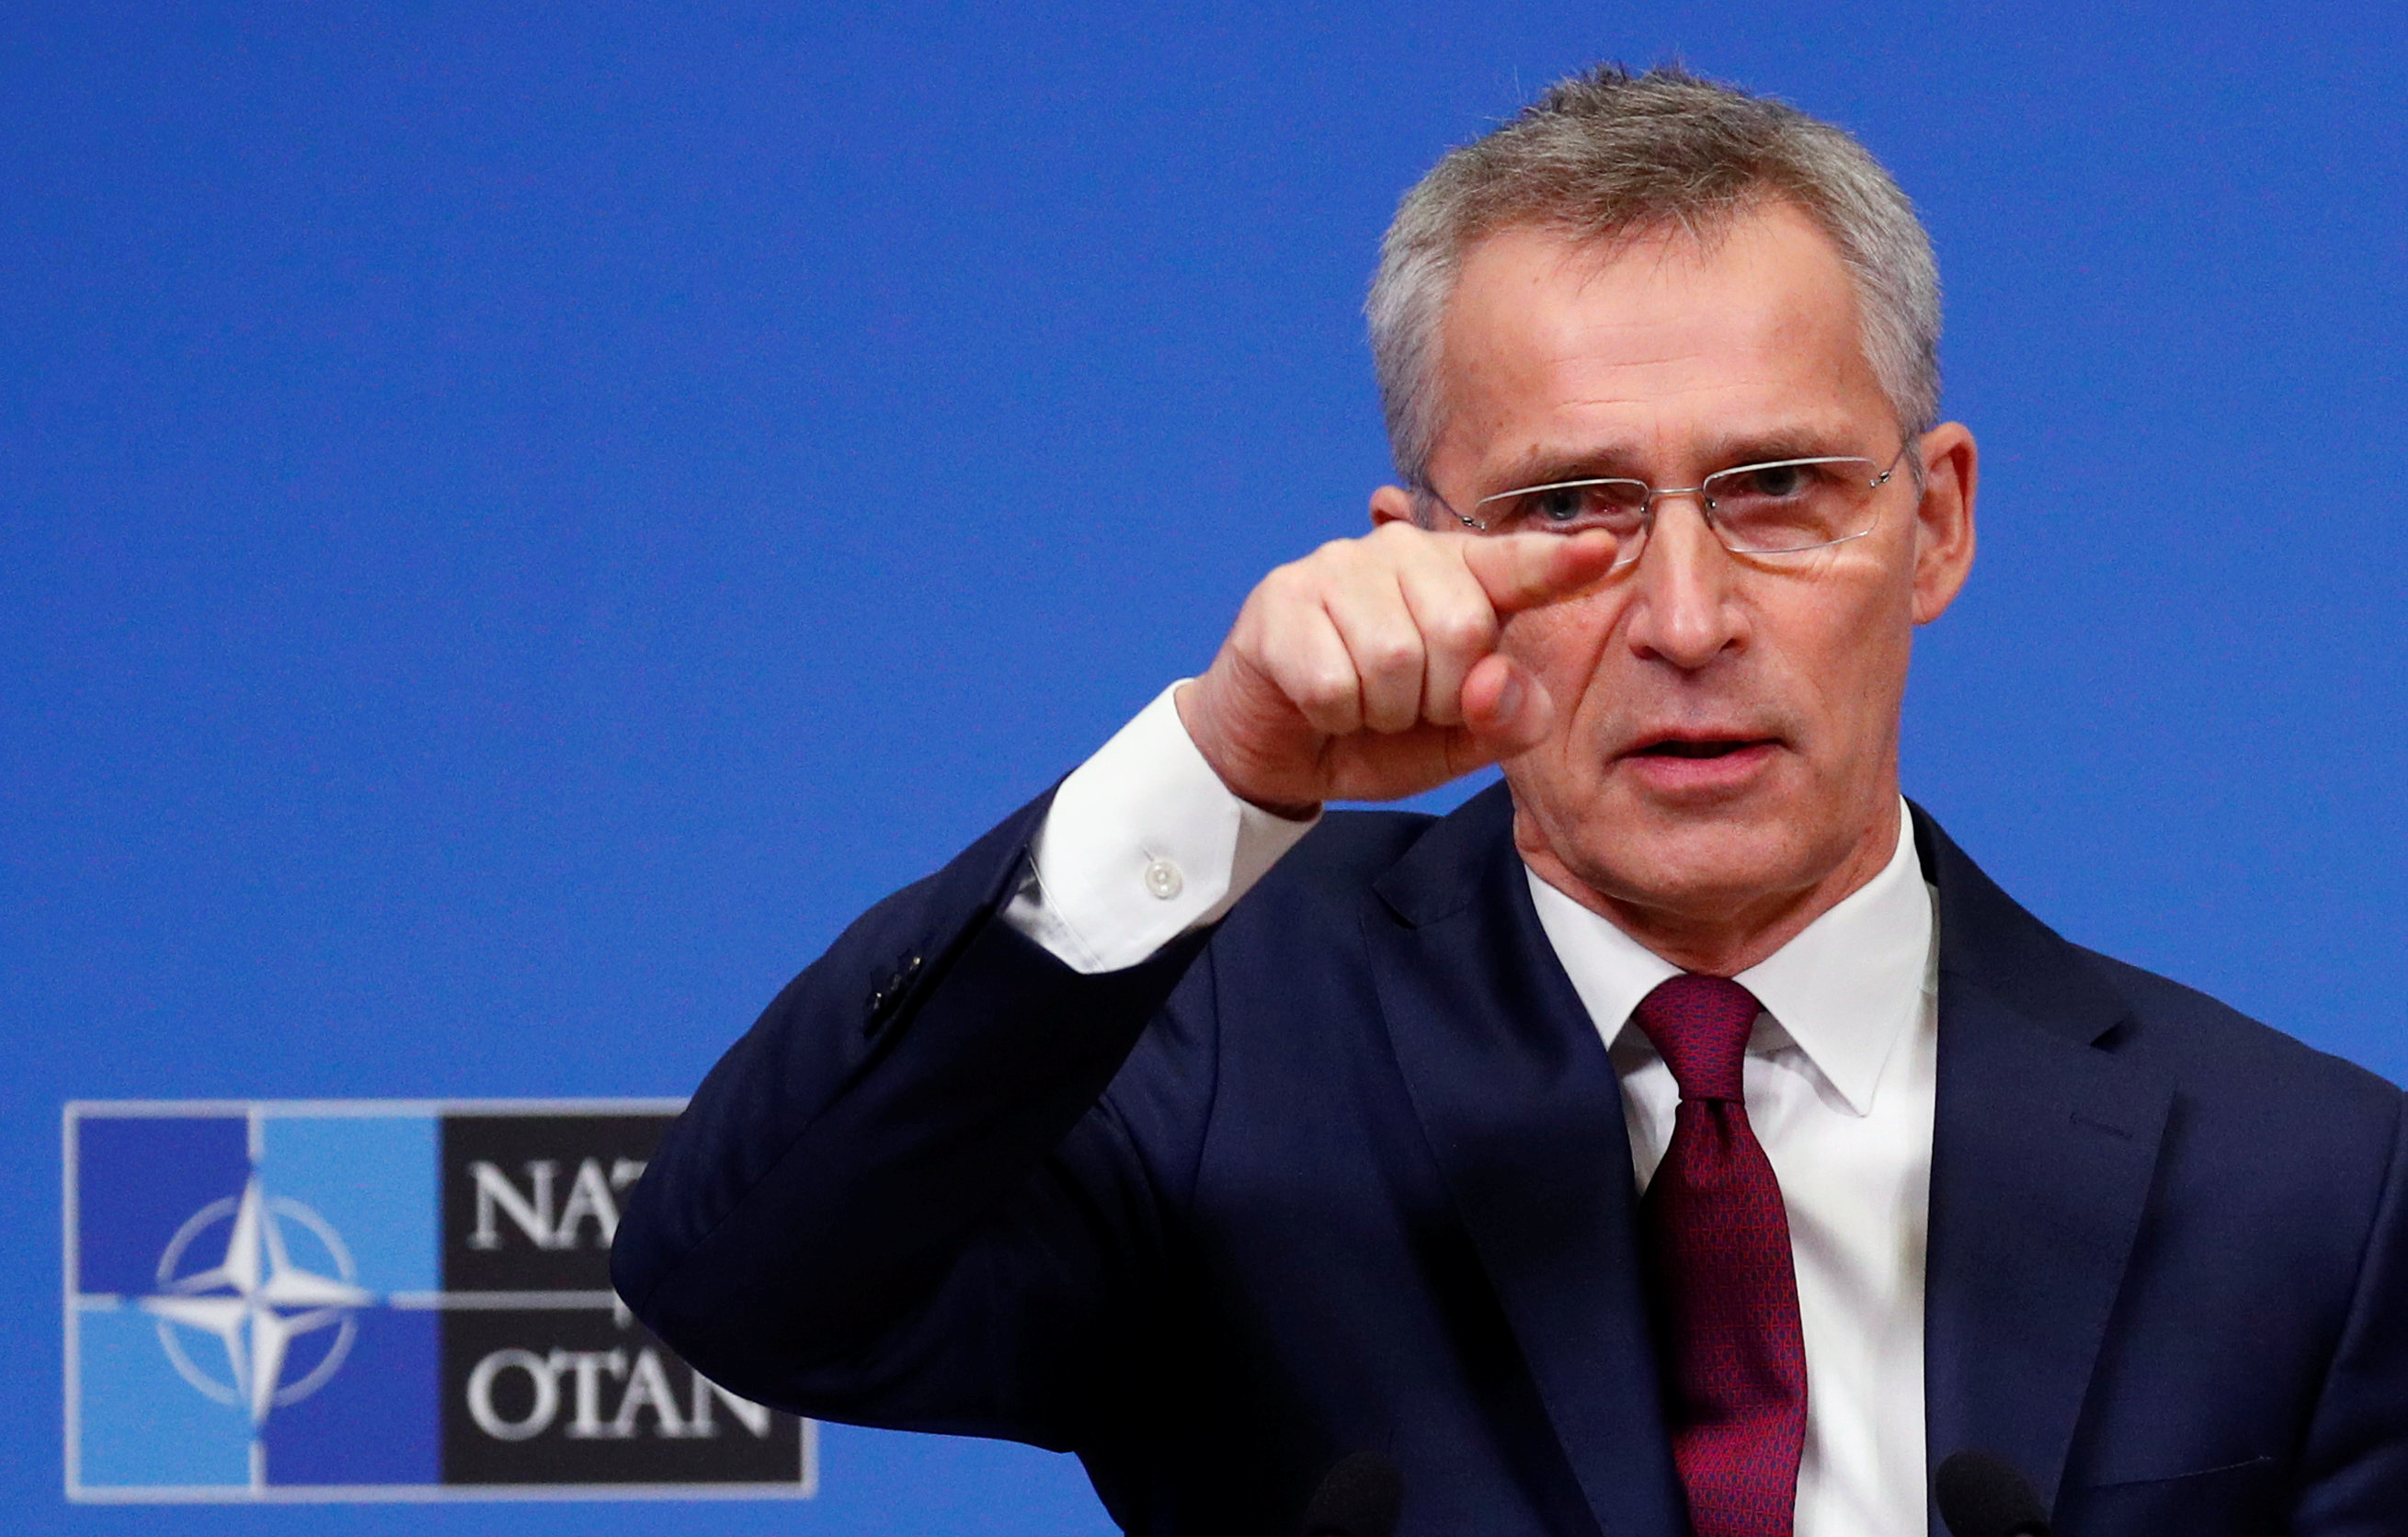 NATO Secretary General Jens Stoltenberg holds a news conference at the Alliance headquarters in Brussels